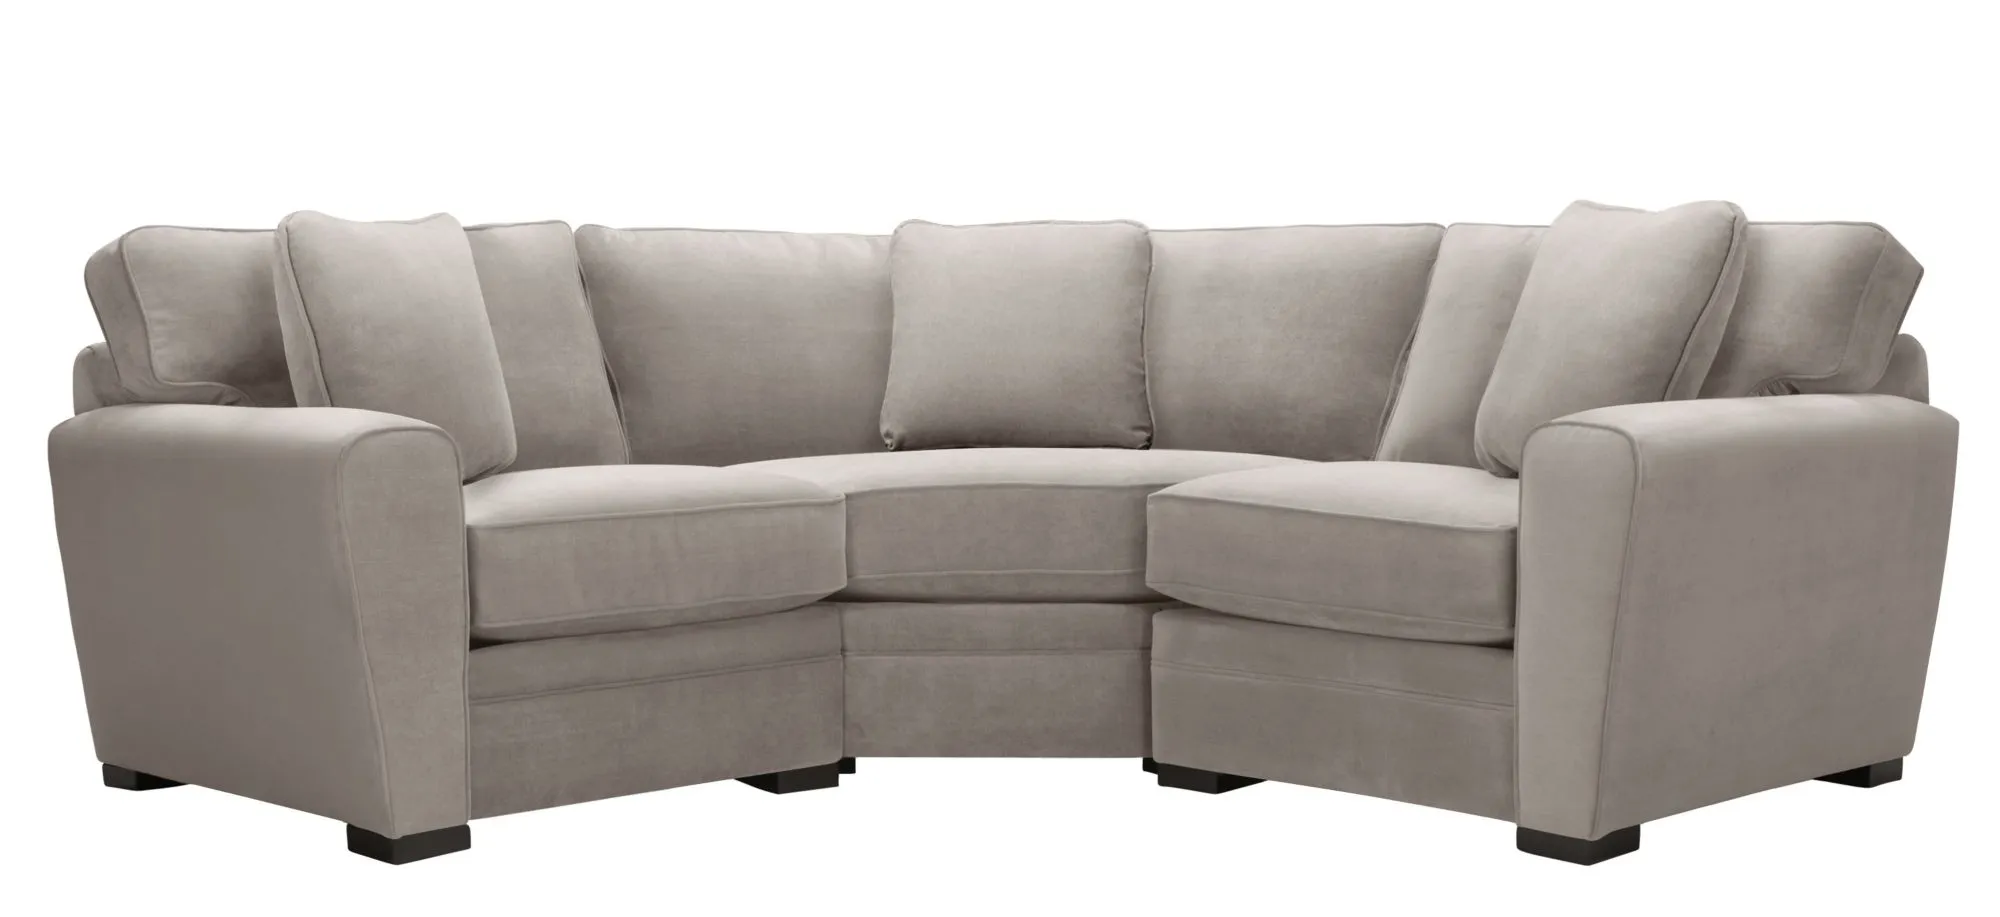 Artemis II 3-pc. Symmetrical Sectional Sofa in Gypsy Platinum by Jonathan Louis